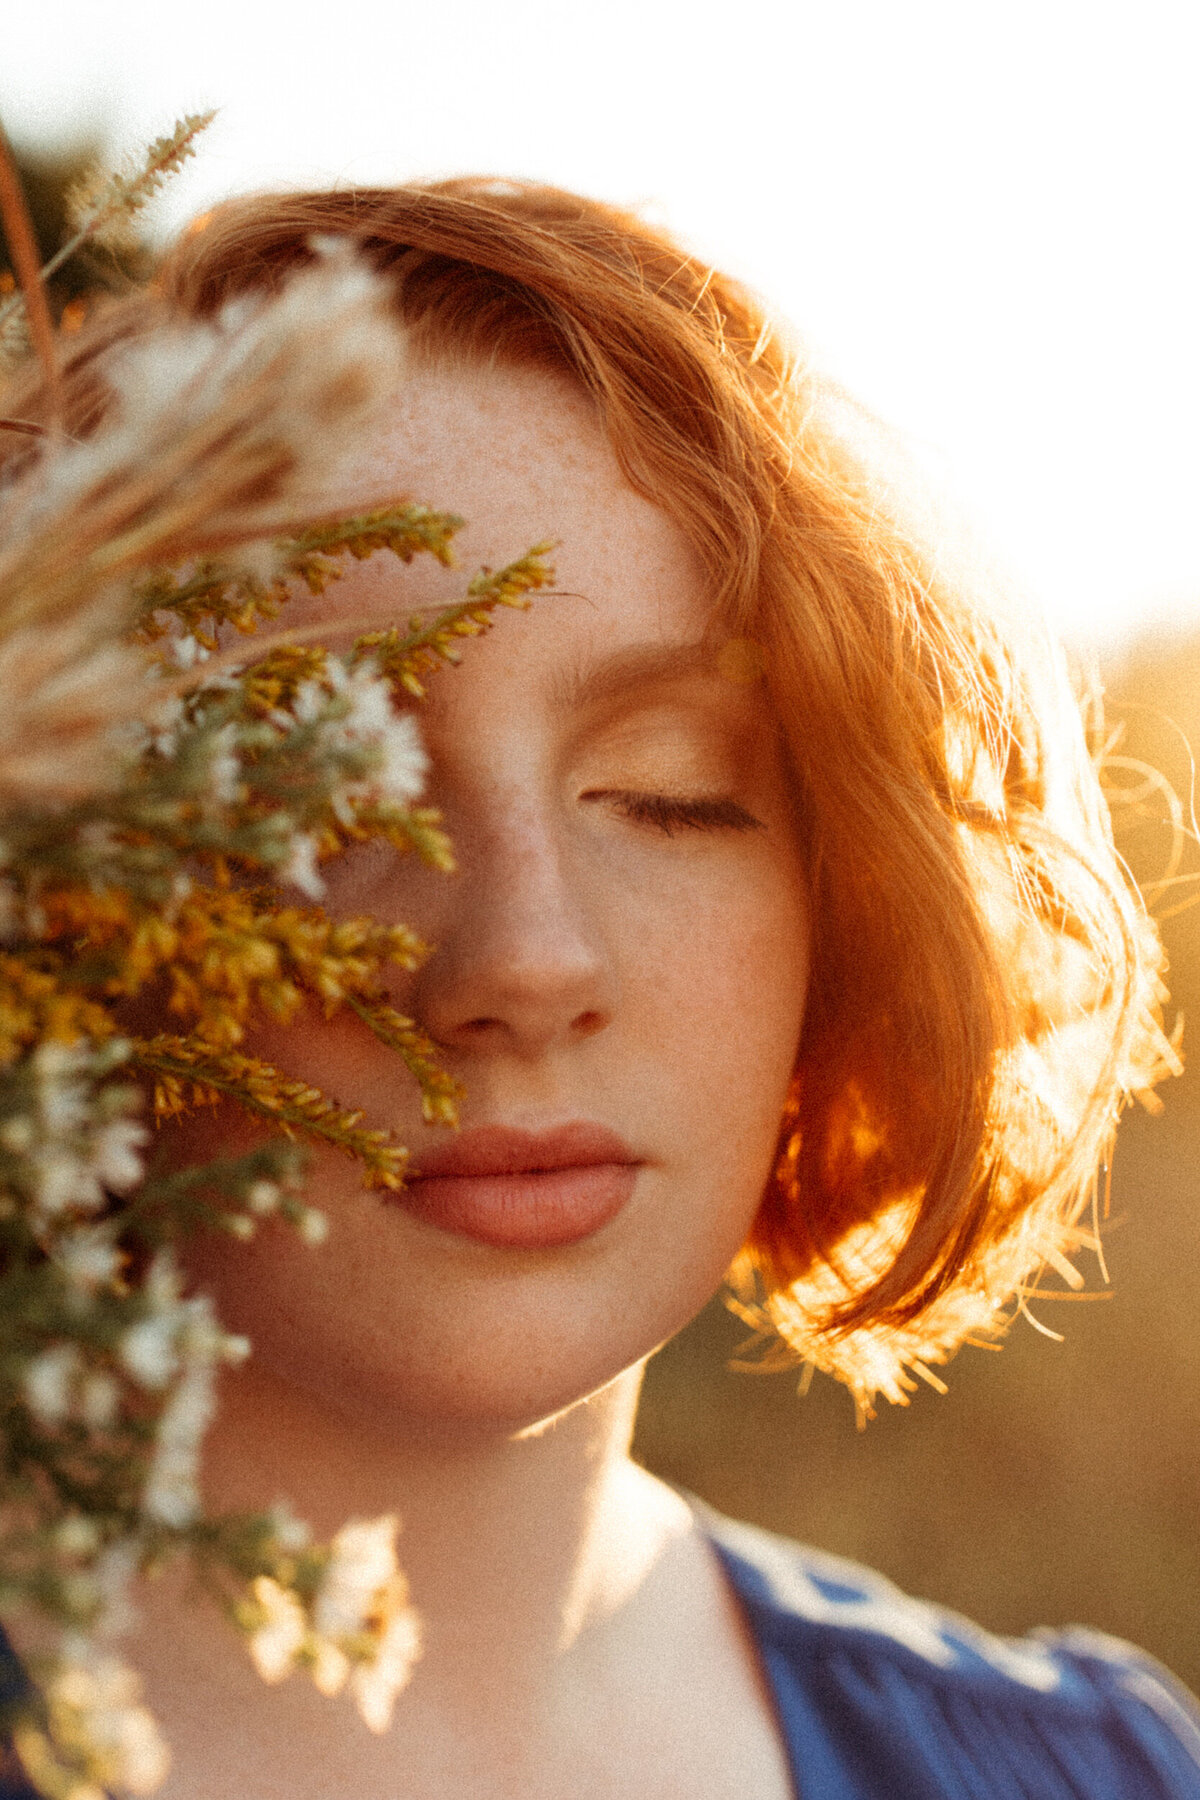 Senior with red hair holding wildflowers over half of her face at golden hour